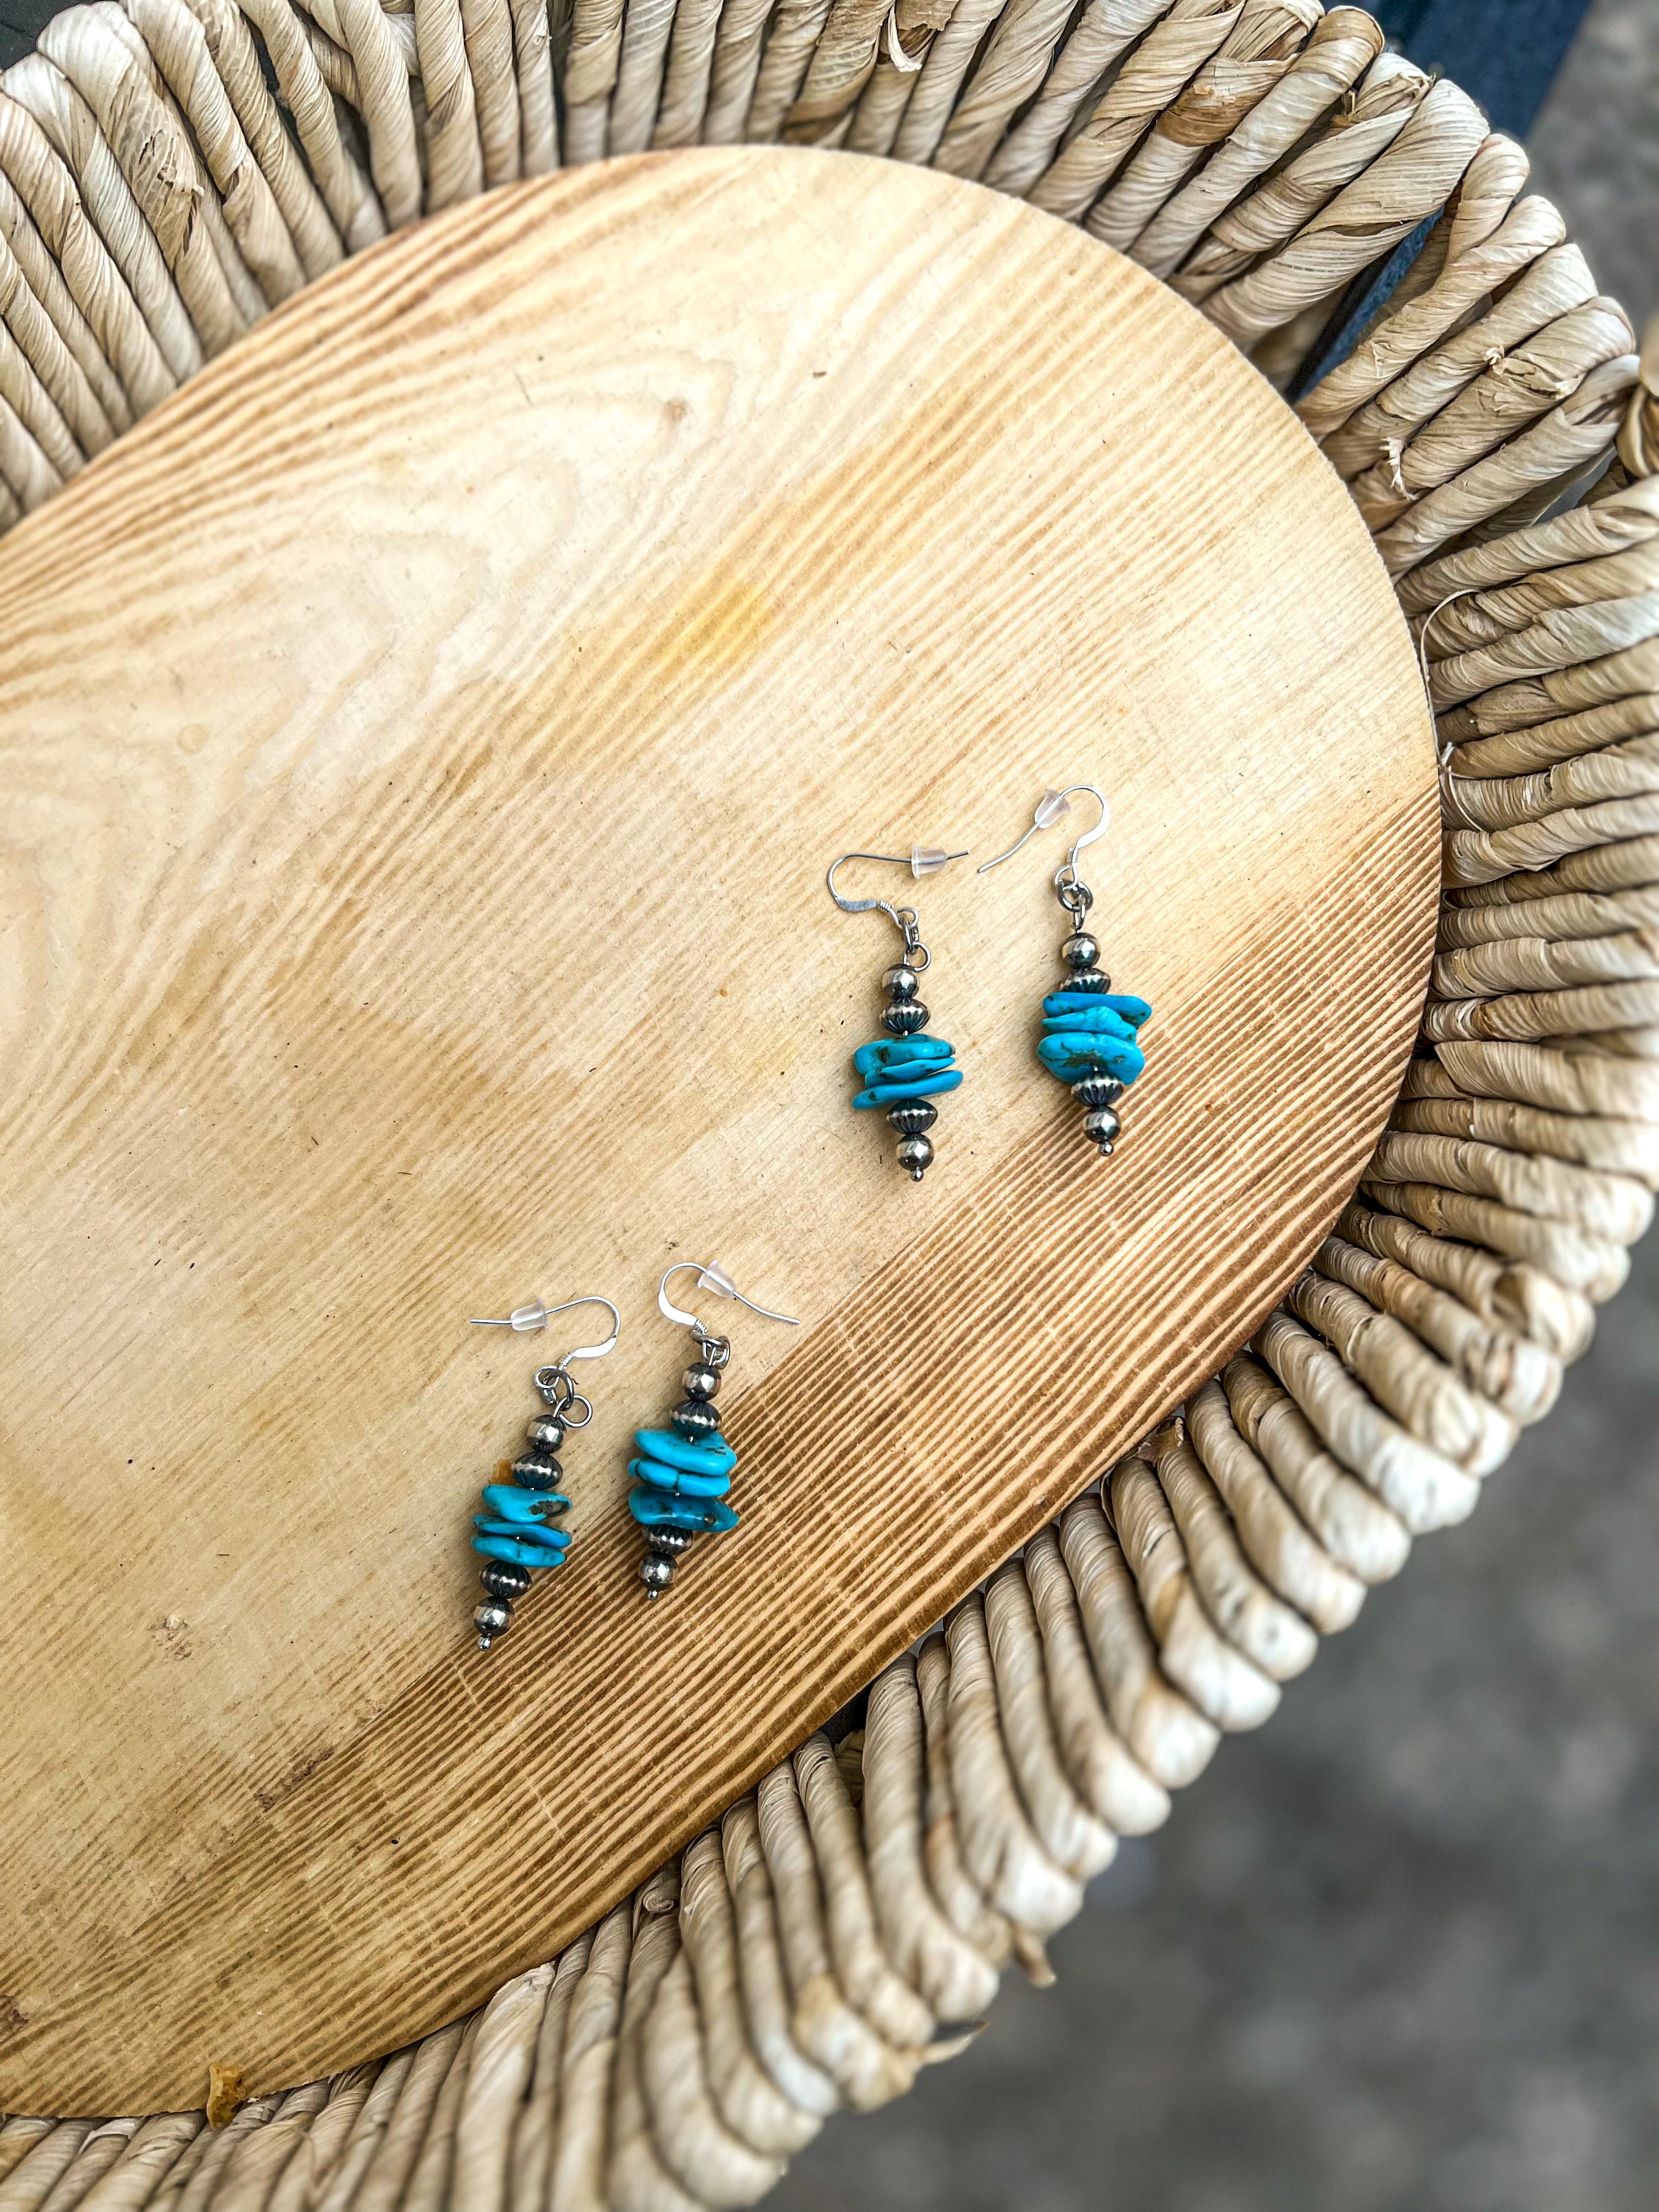 Turquoise and Navajo Pearl Earrings